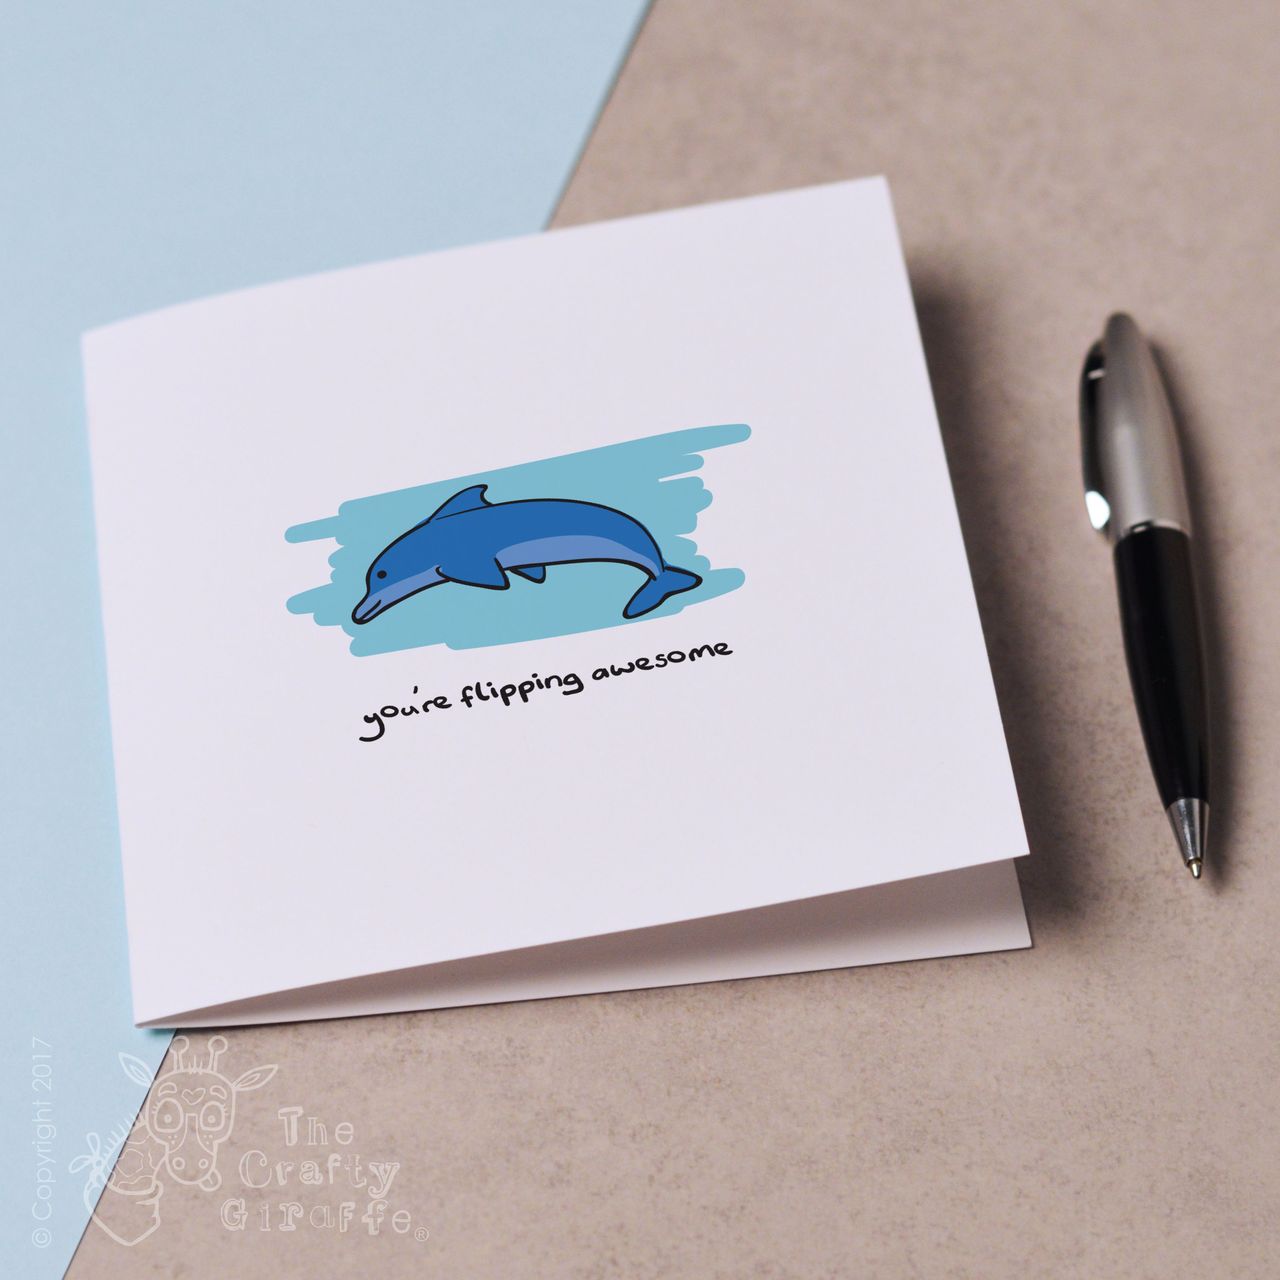 You’re flipping awesome – dolphin Card